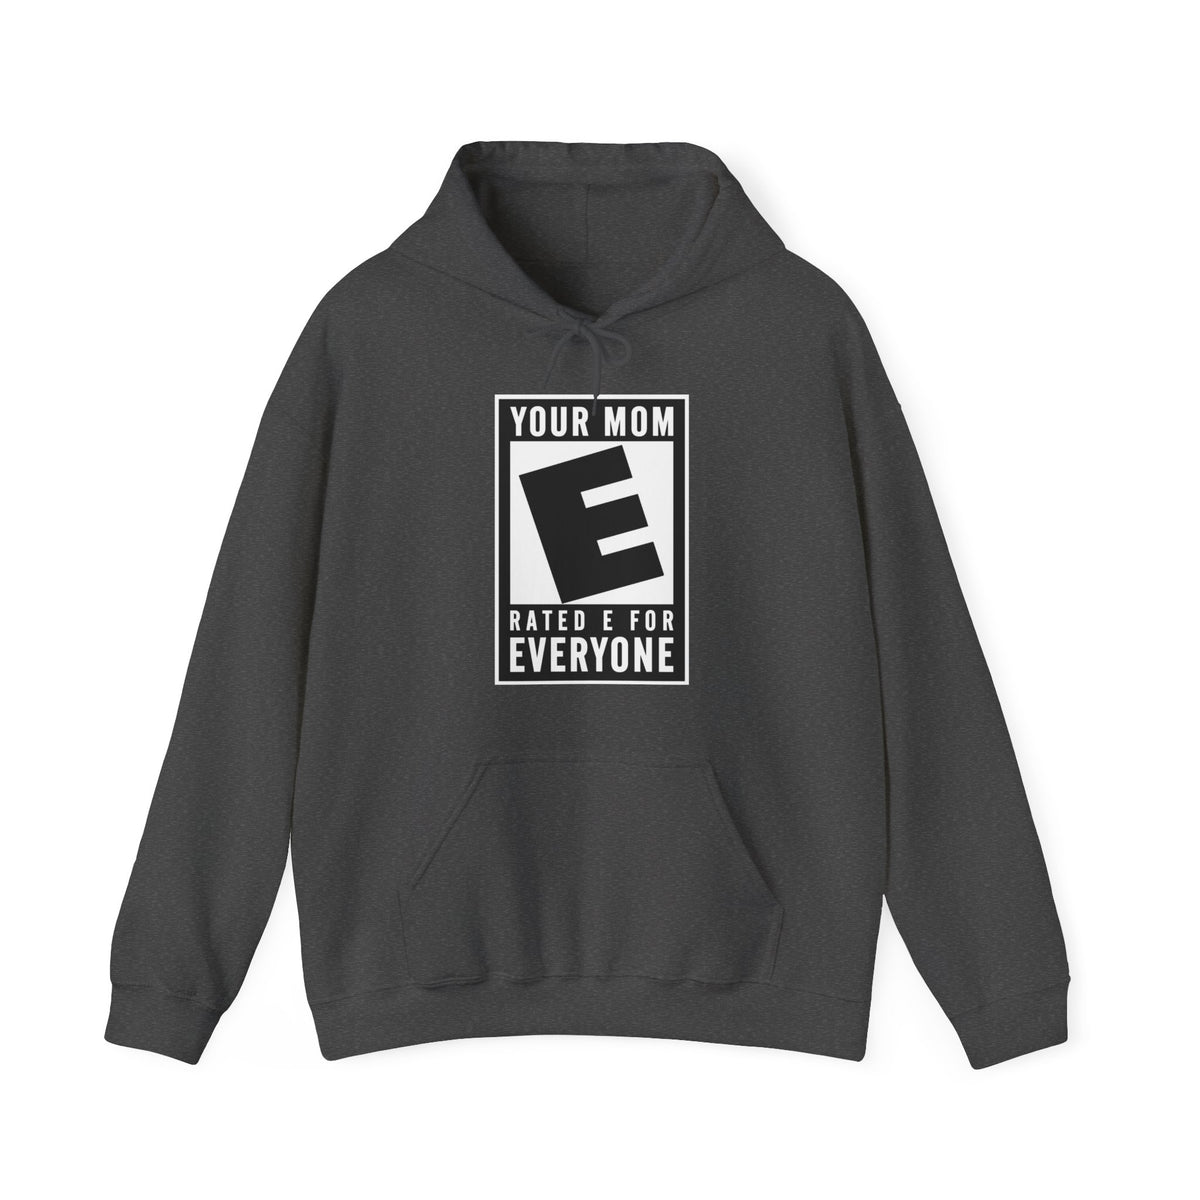 Your Mom - Rated E For Everyone - Hoodie